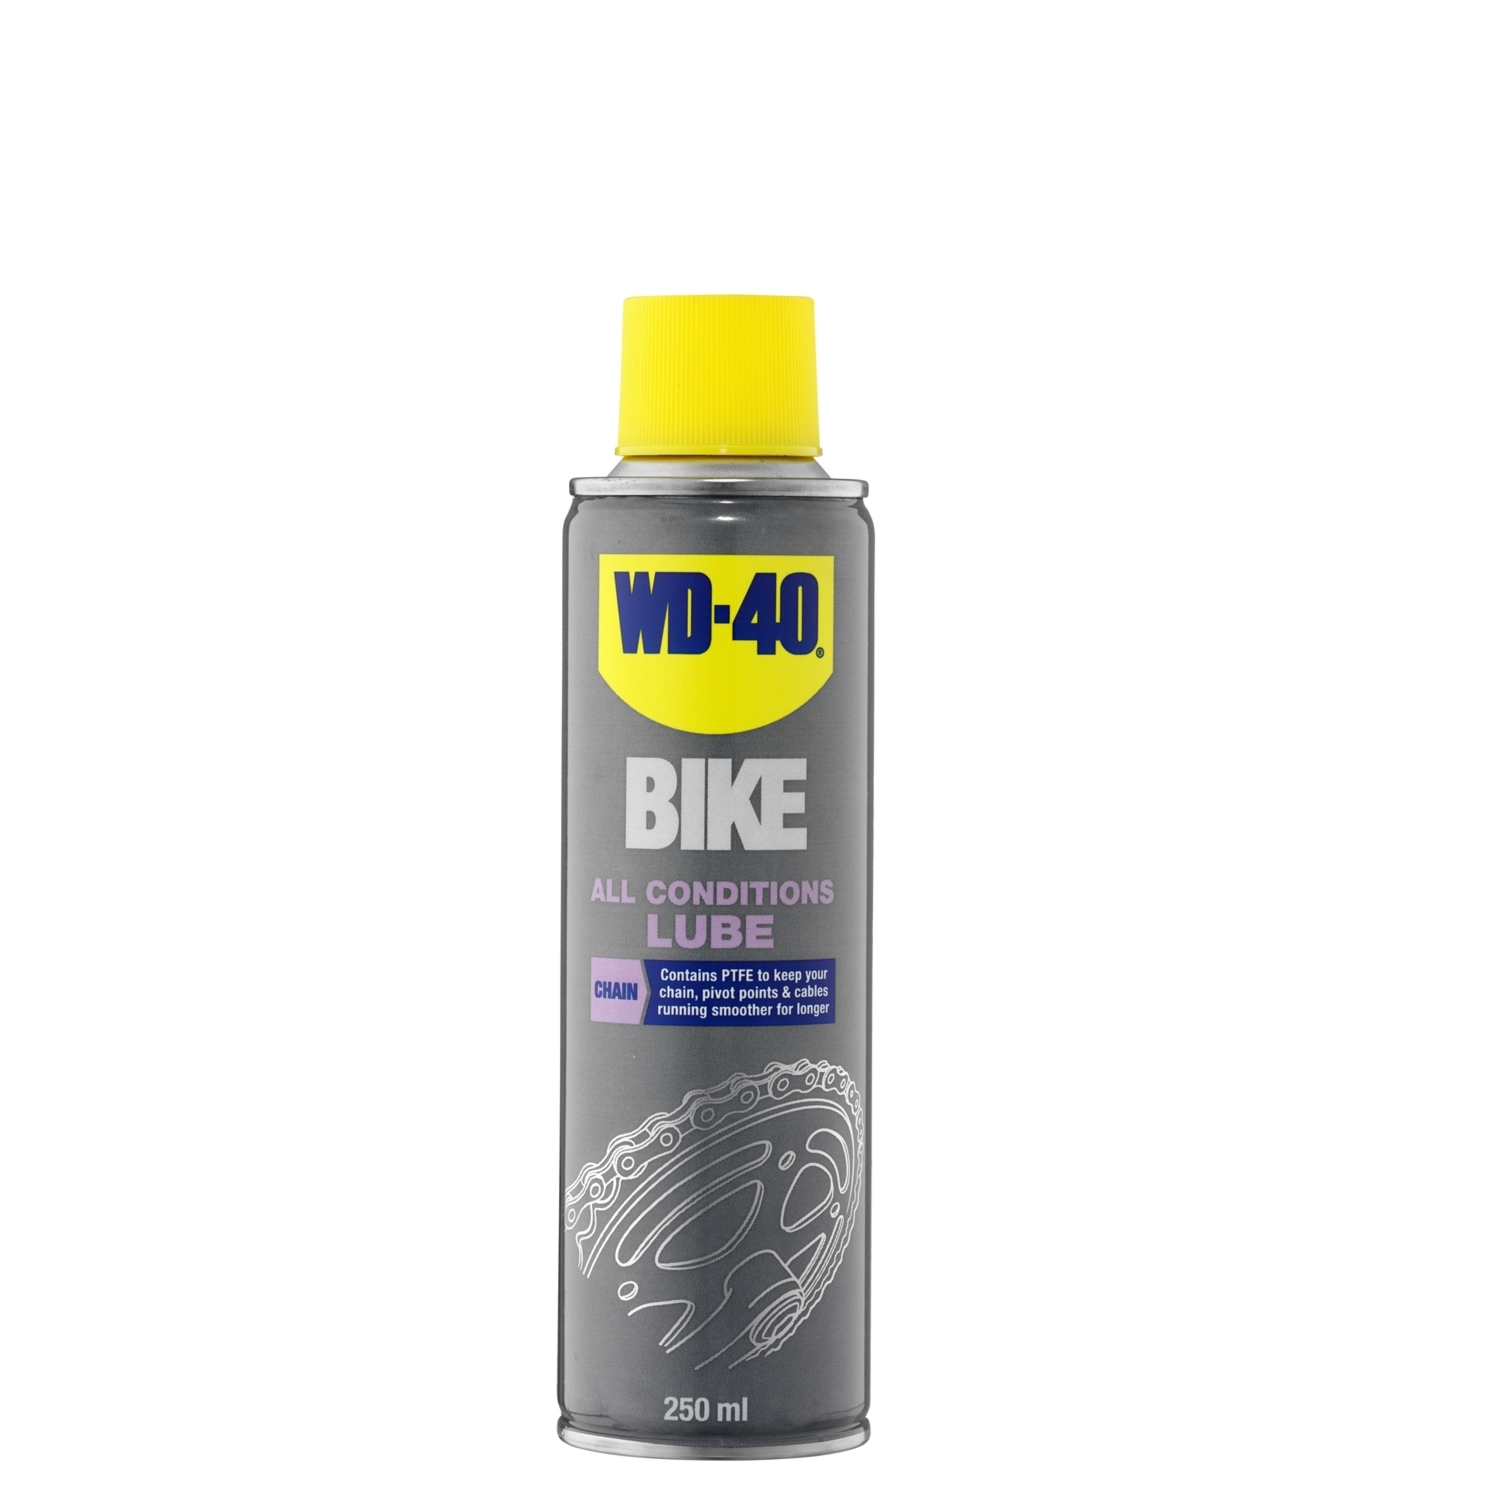 WD-40 Bike All Conditions Lube Image